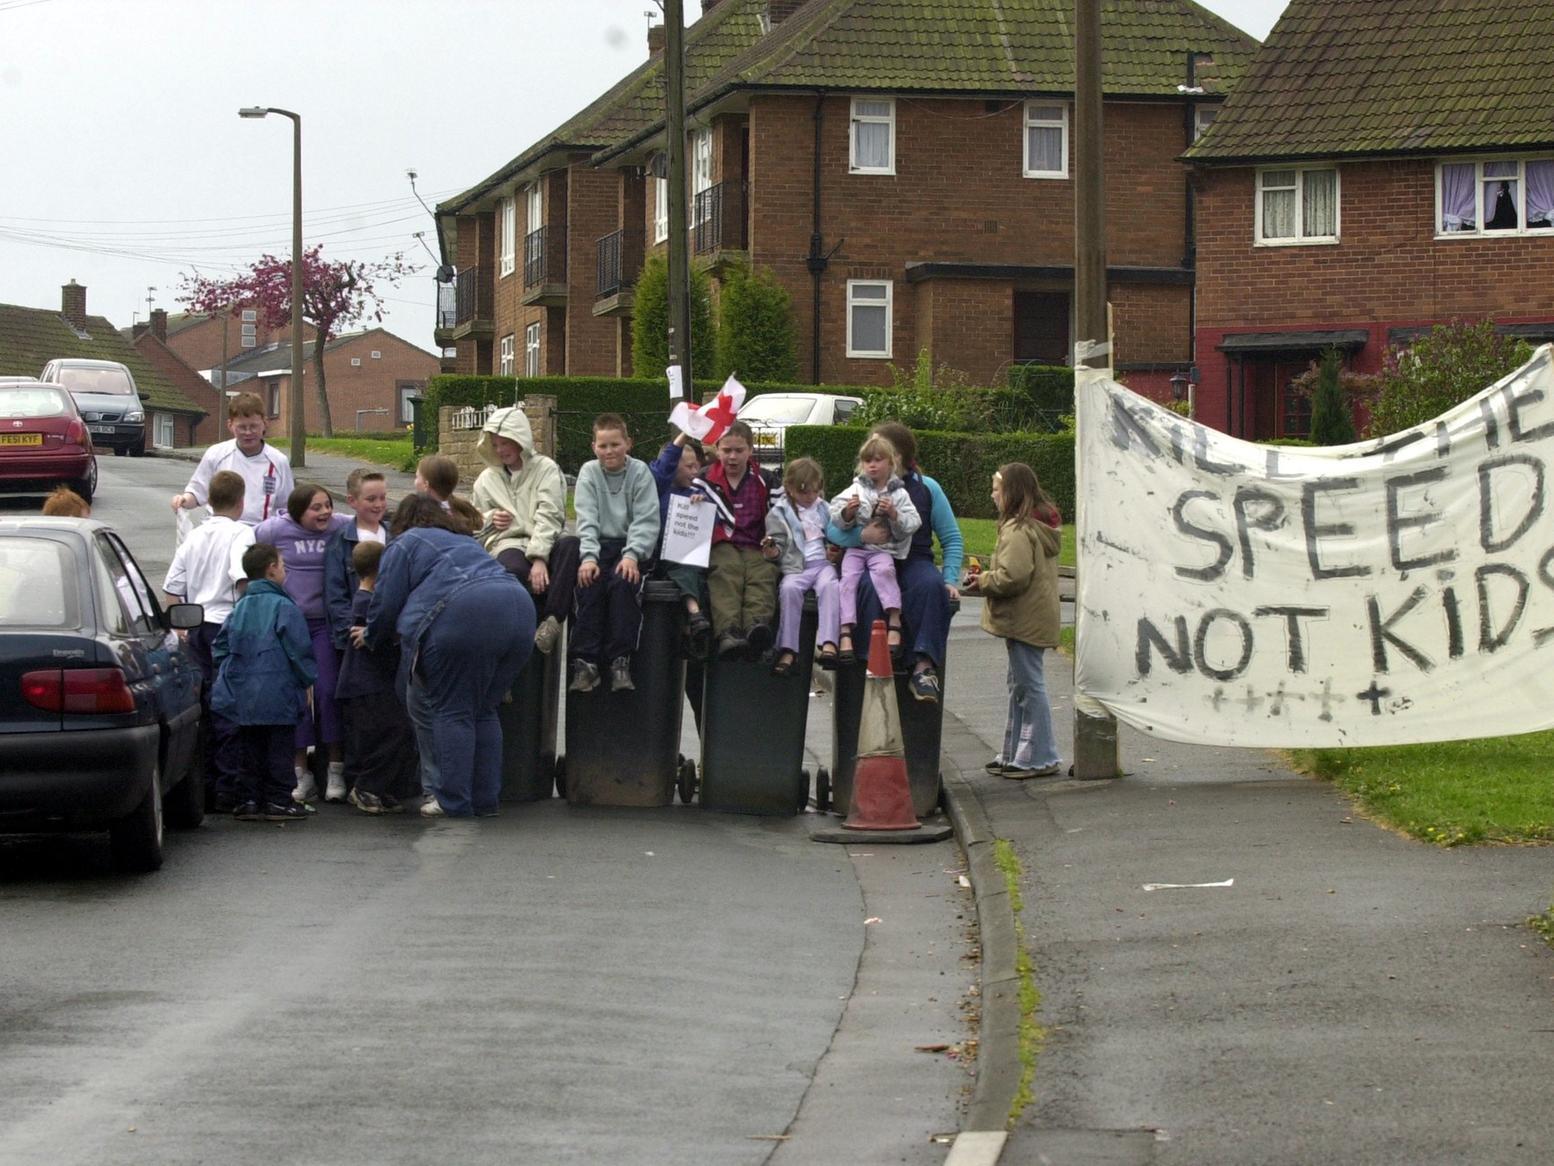 Local residents block Queenshill Avenue in Moortown, which they claimed was being used as a 'rat run' by drivers trying to avoid roadworks on the nearby ring road.